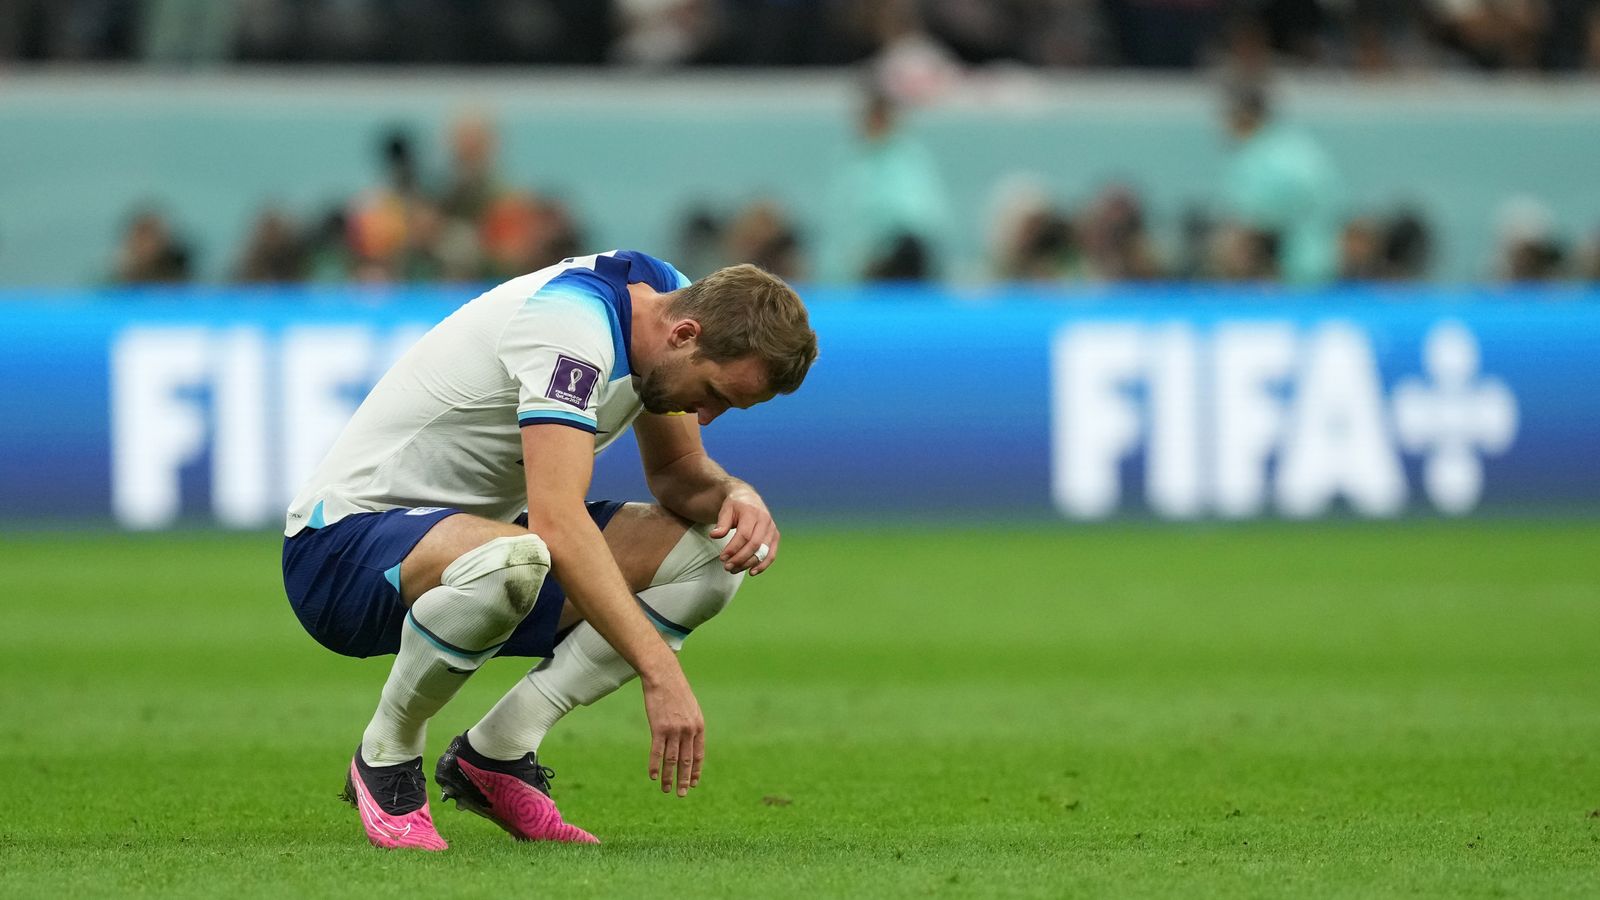 Qatar World Cup: England knocked out after quarter-final defeat to holders France